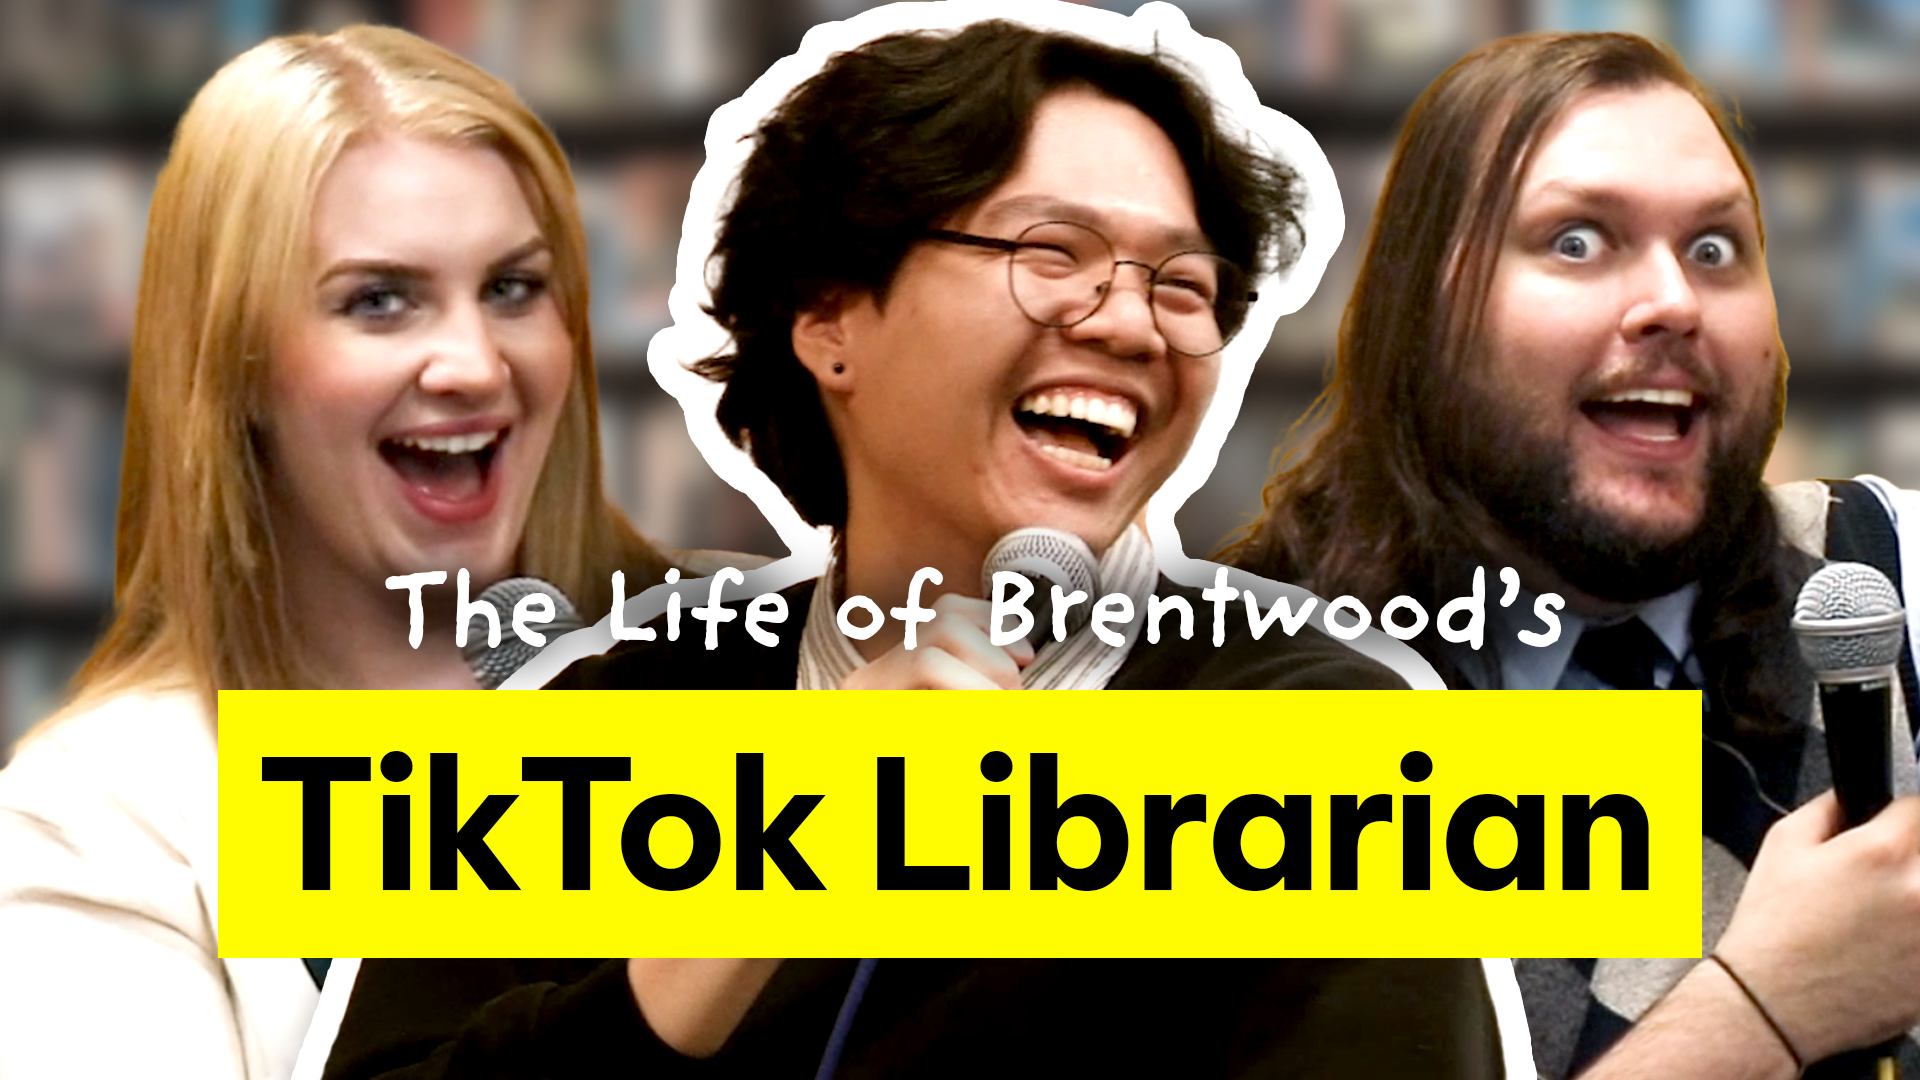 The Life of Brentwood's TikTok Librarian